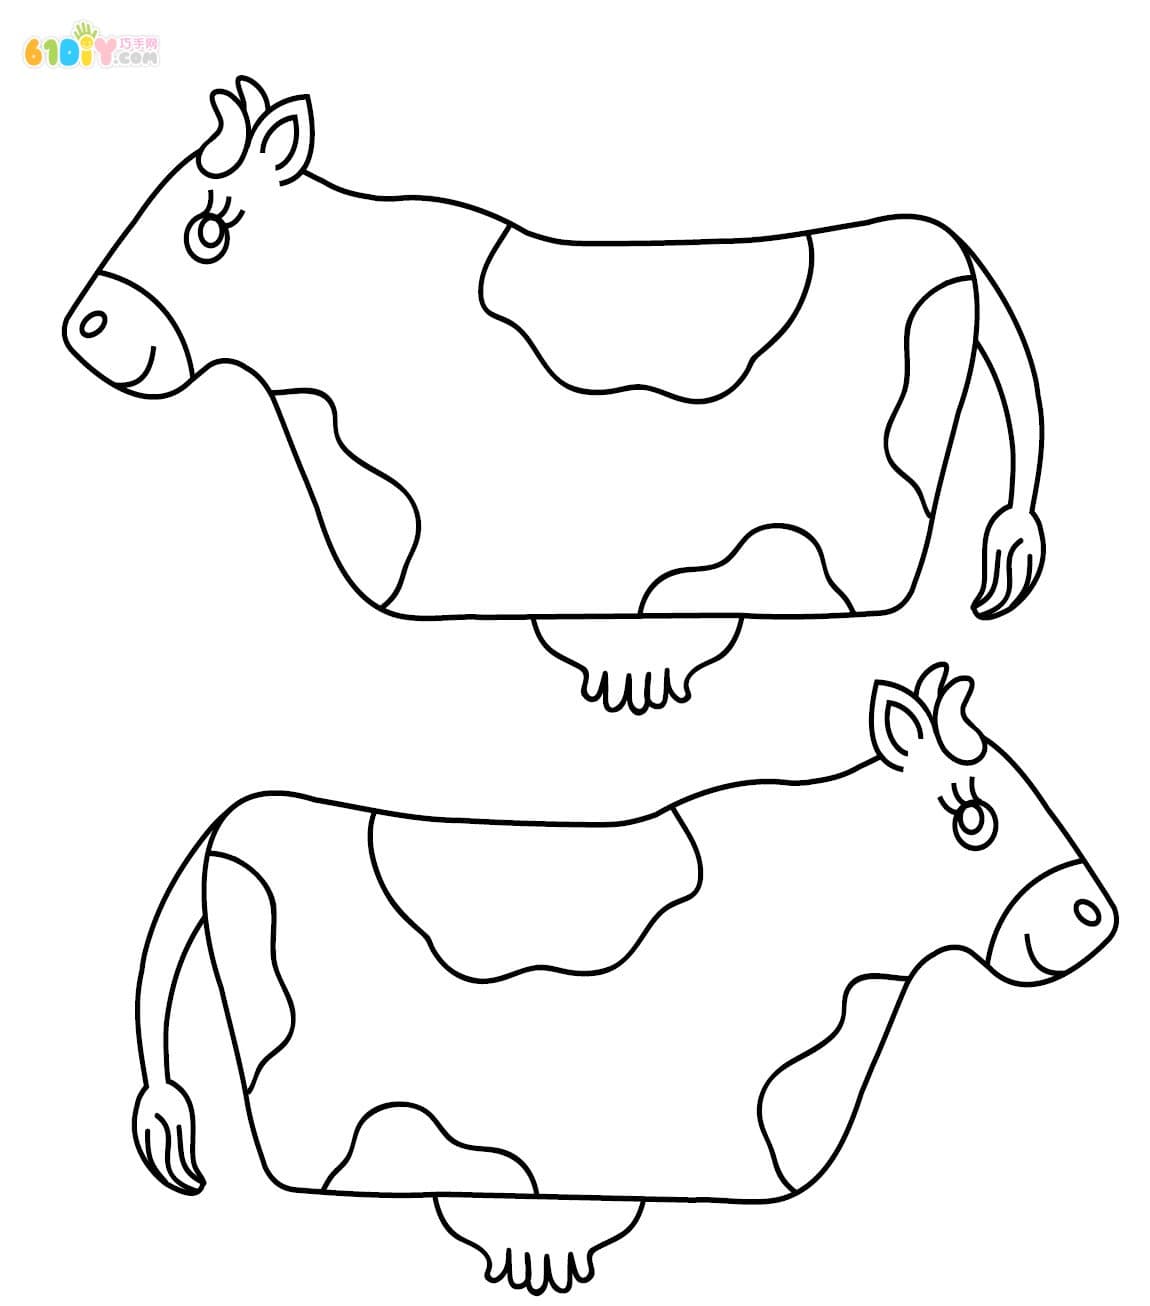 Cow coloring map